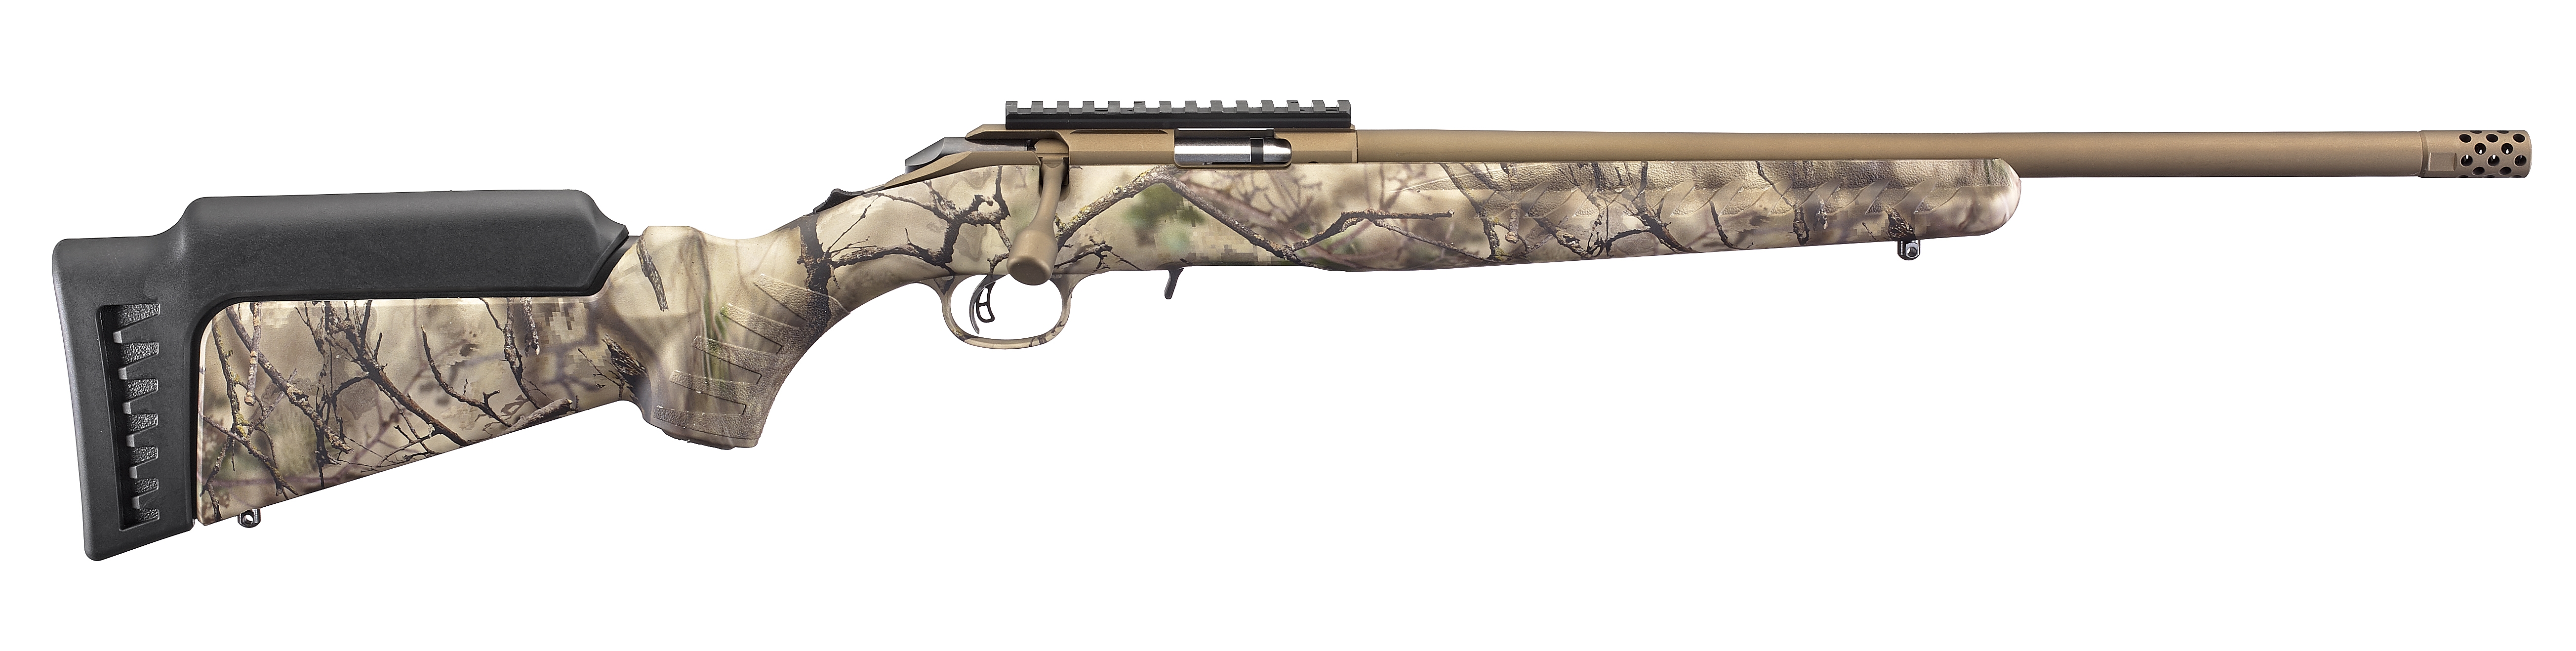 Ruger American Rifle 22 LR